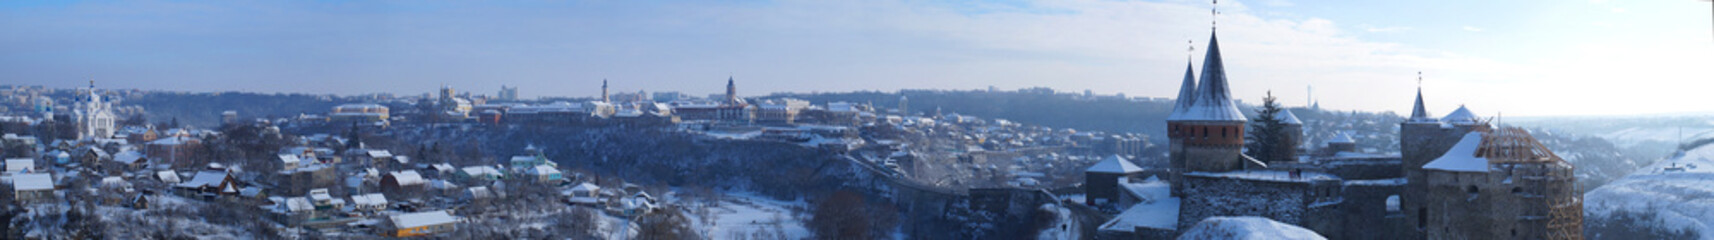 Winter picturesque view at canyon and old city of Kamianets-Podilskyi, Ukraine